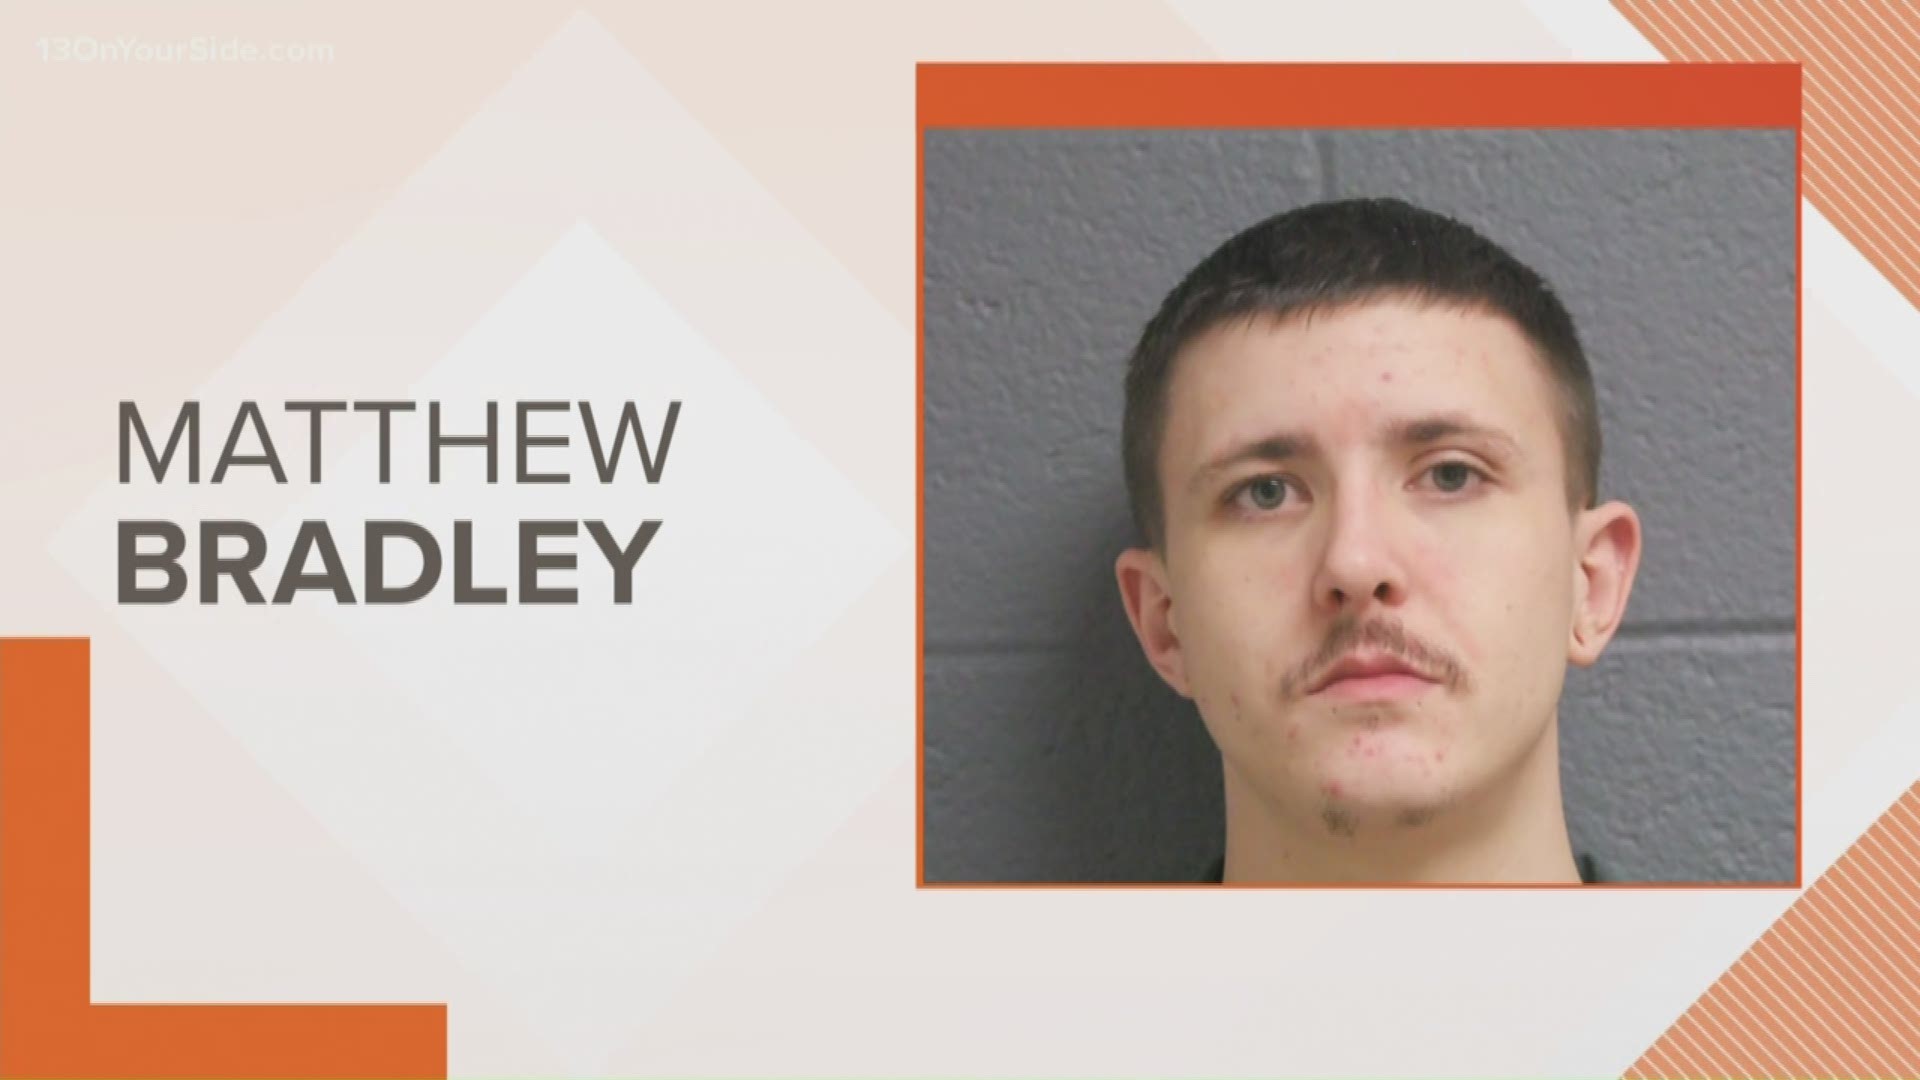 The White Cloud Police Department is looking for Matthew Bradley, 32, a man who went to prison in 2015 for concealing the death of his 4-month-old daughter.